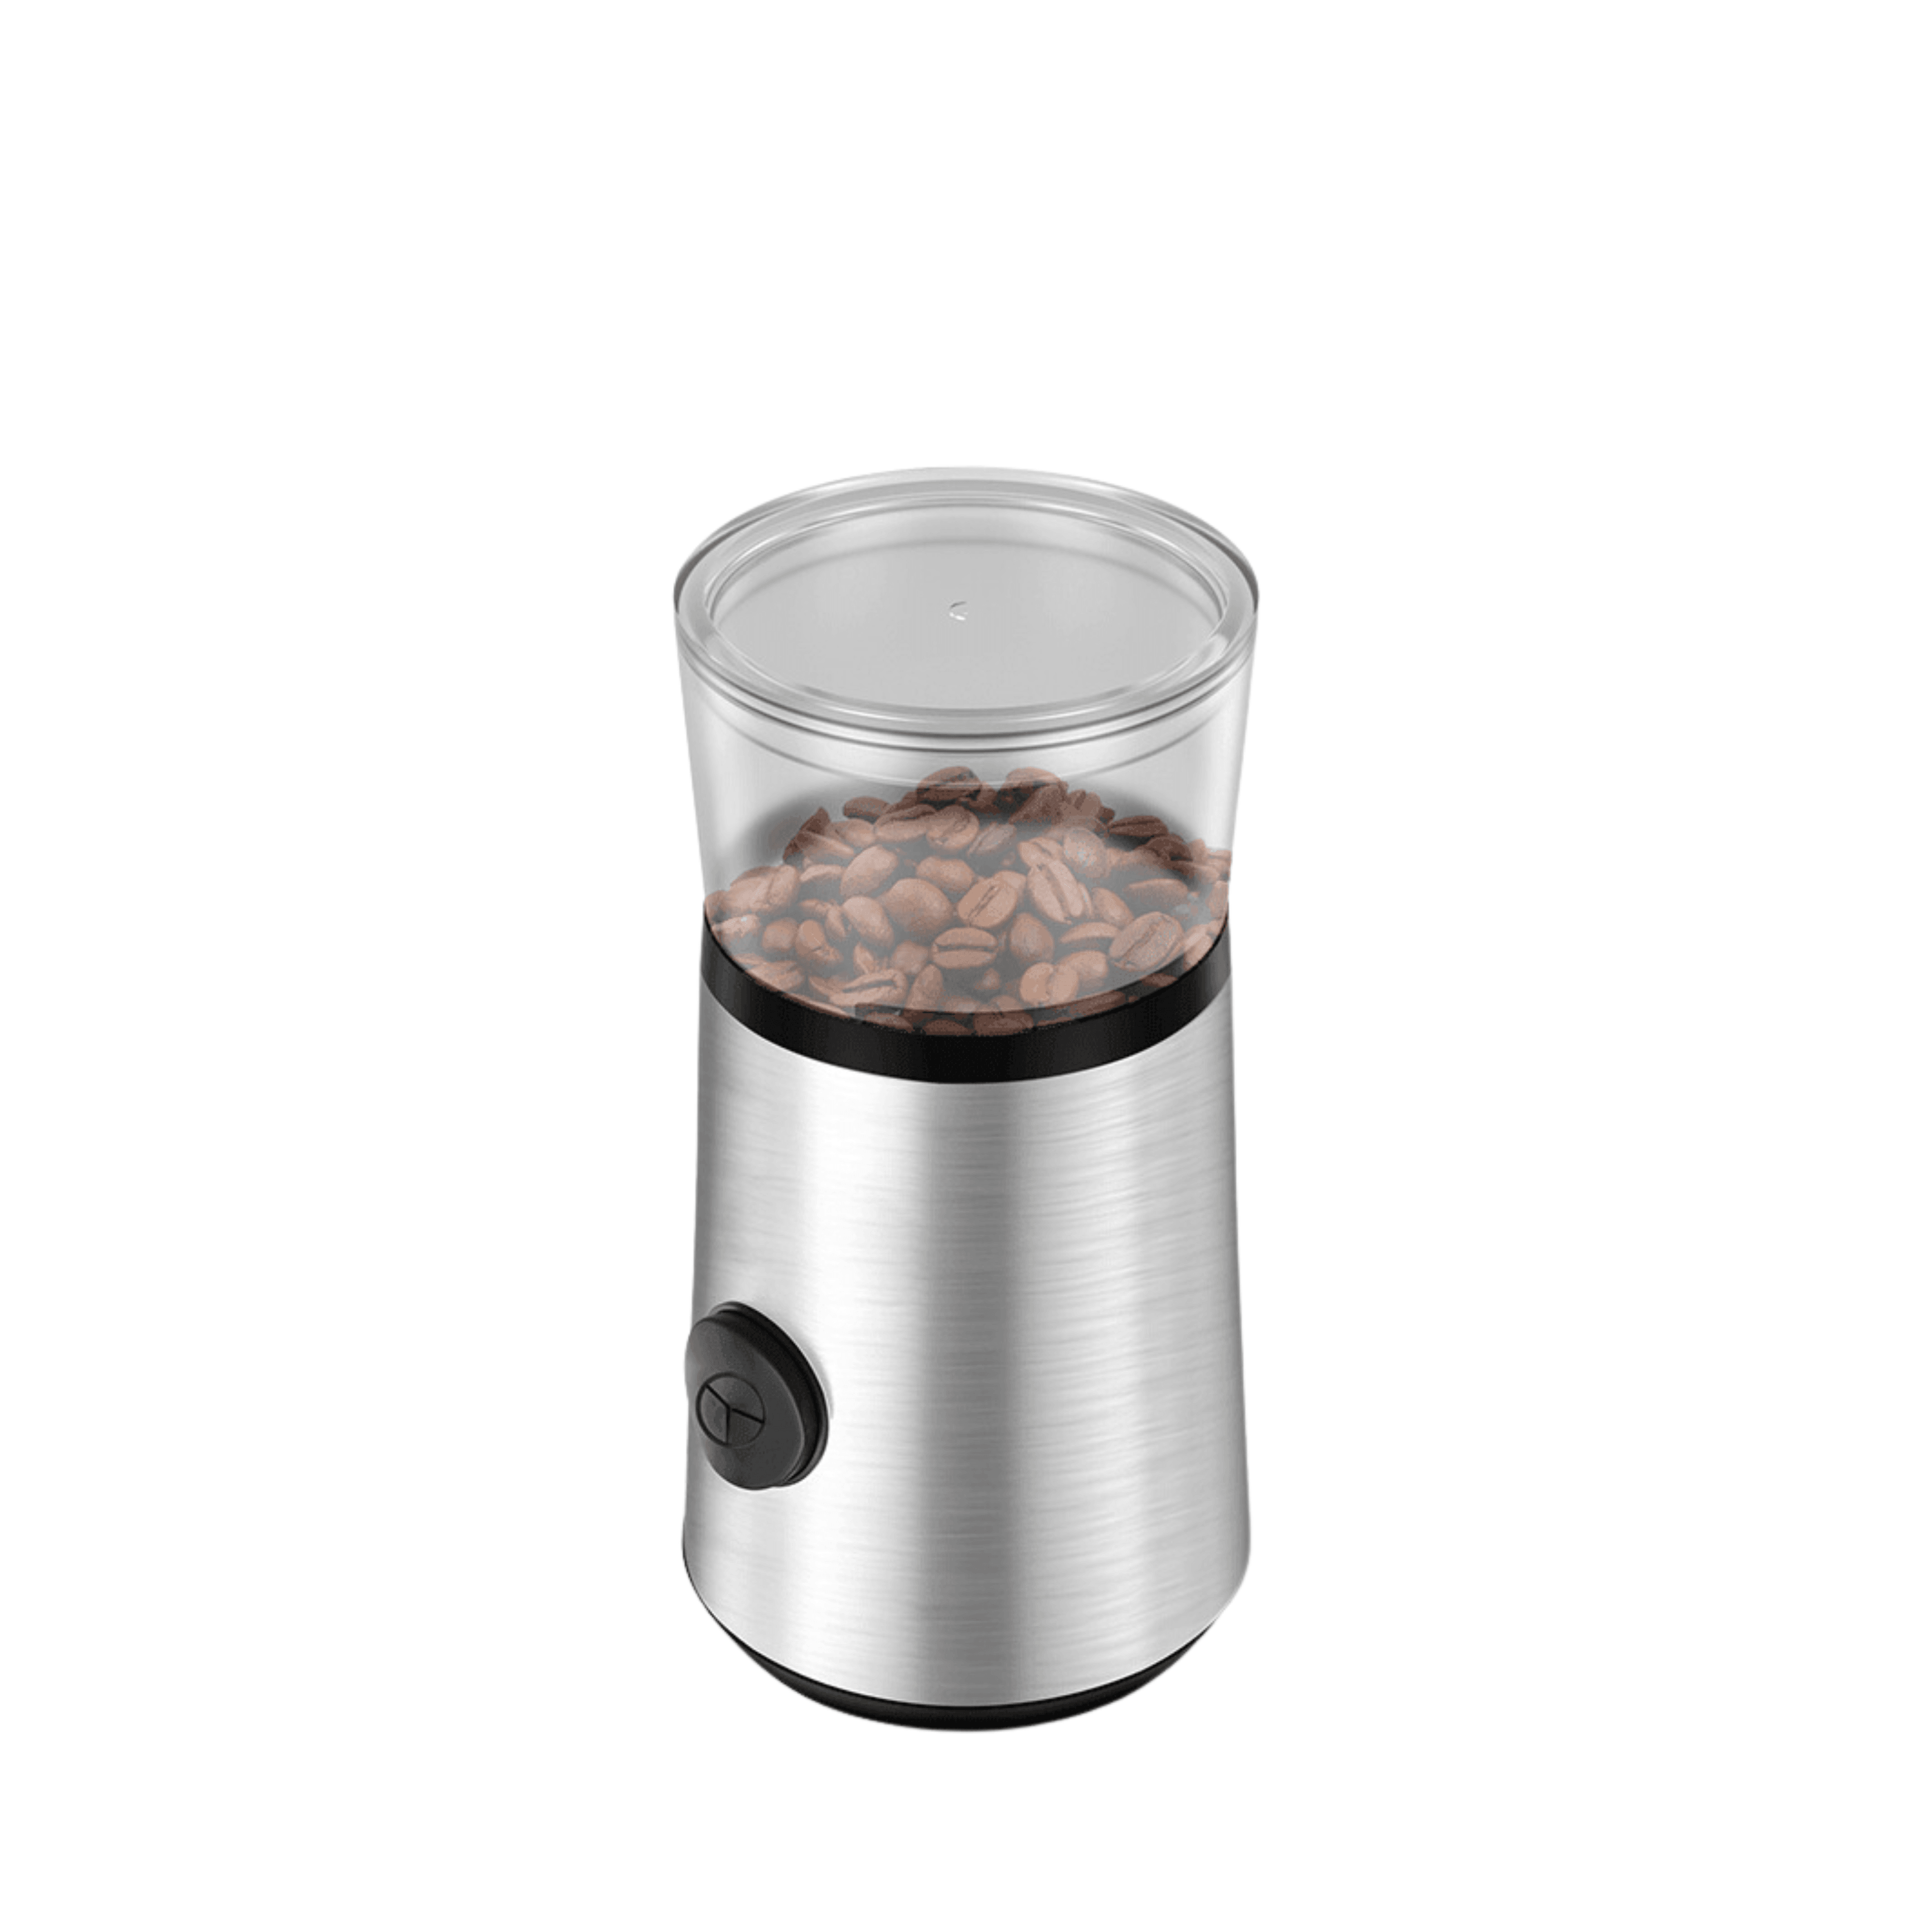 Airbot Coffee Grinder CG100 - Cathay Electronics SG